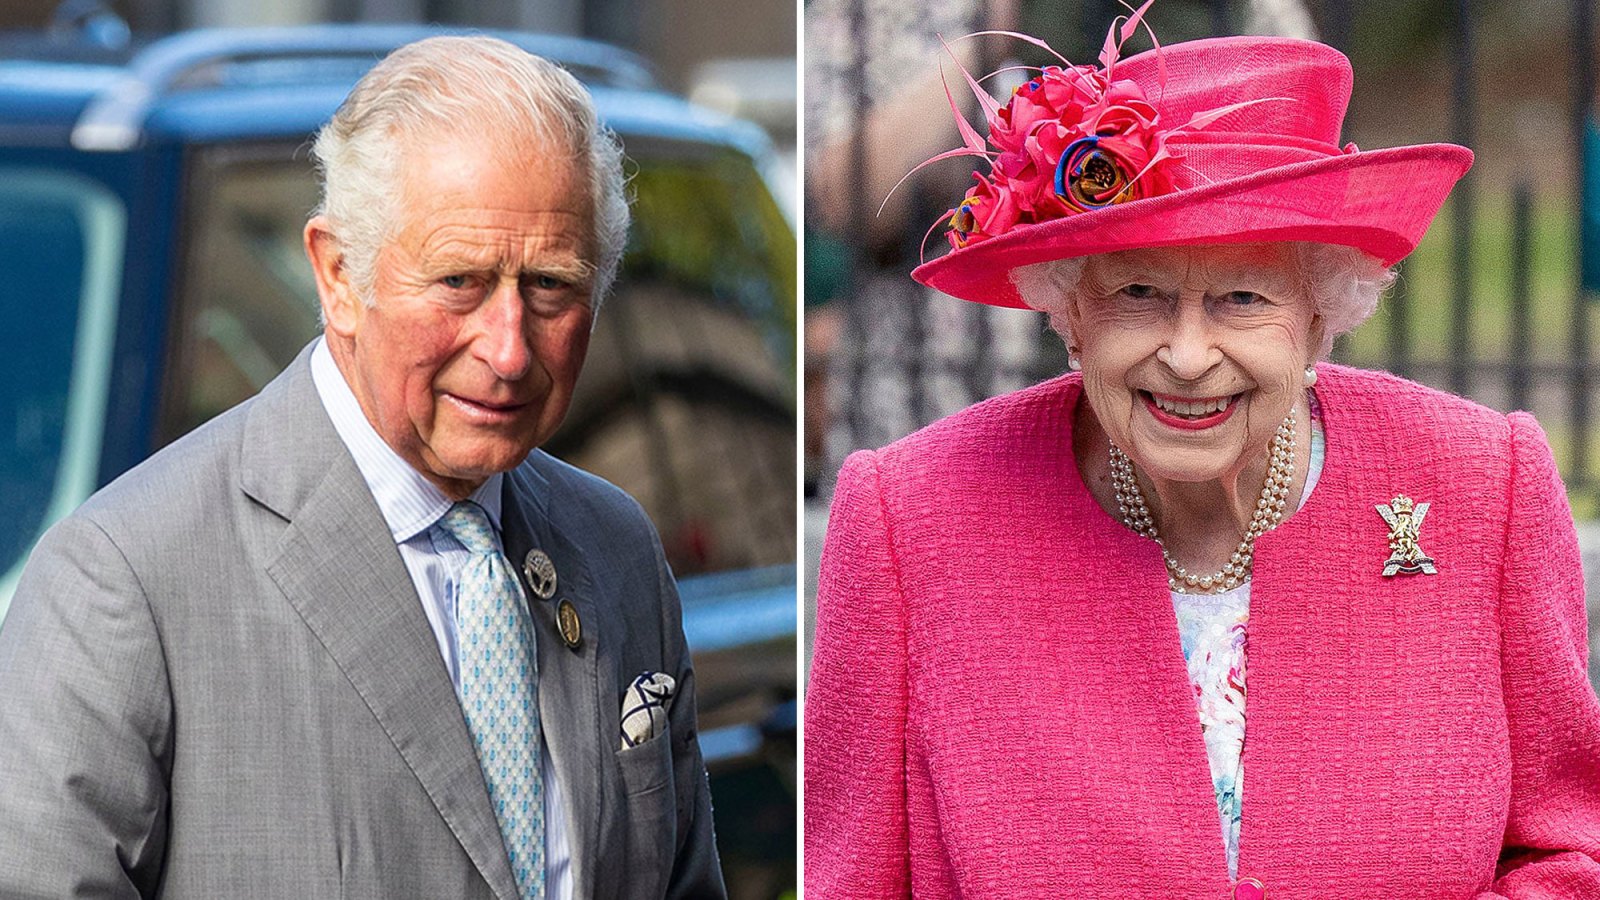 Prince Charles Gives Update on Queen Elizabeth II’s Health as She’s Confirmed to Attend Remembrance Day